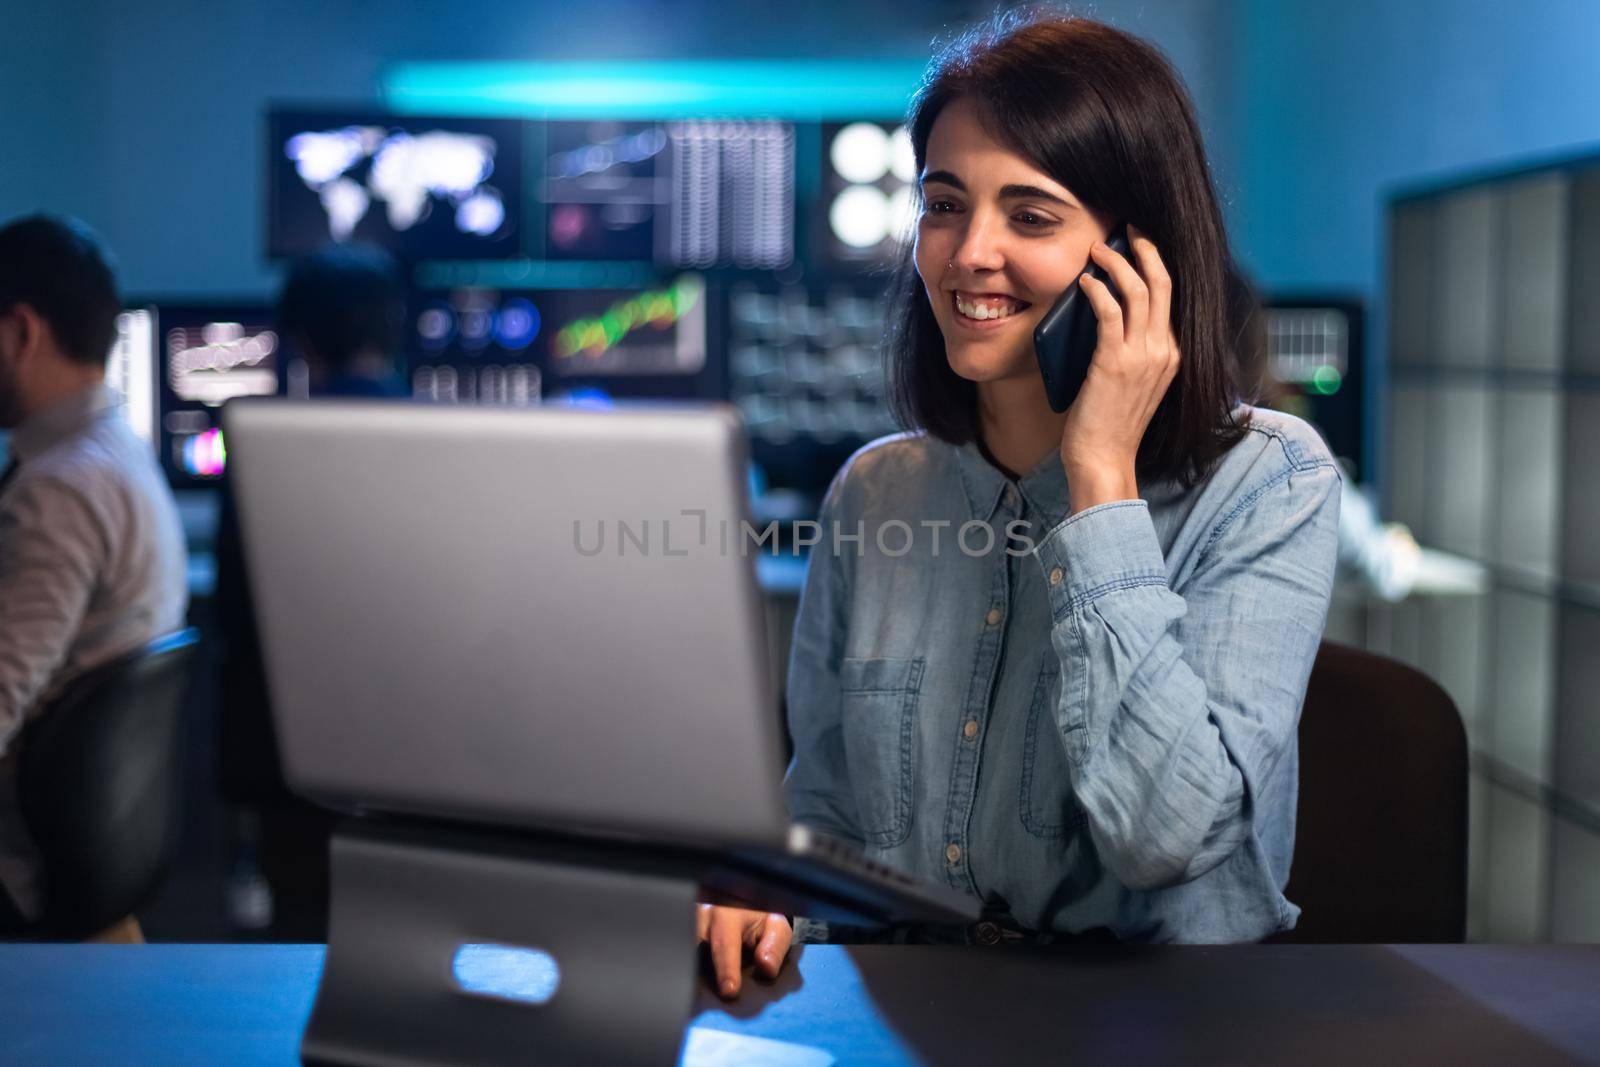 Female stock market trader working in office using laptop and talking on the phone with client. Financial adviser concept.